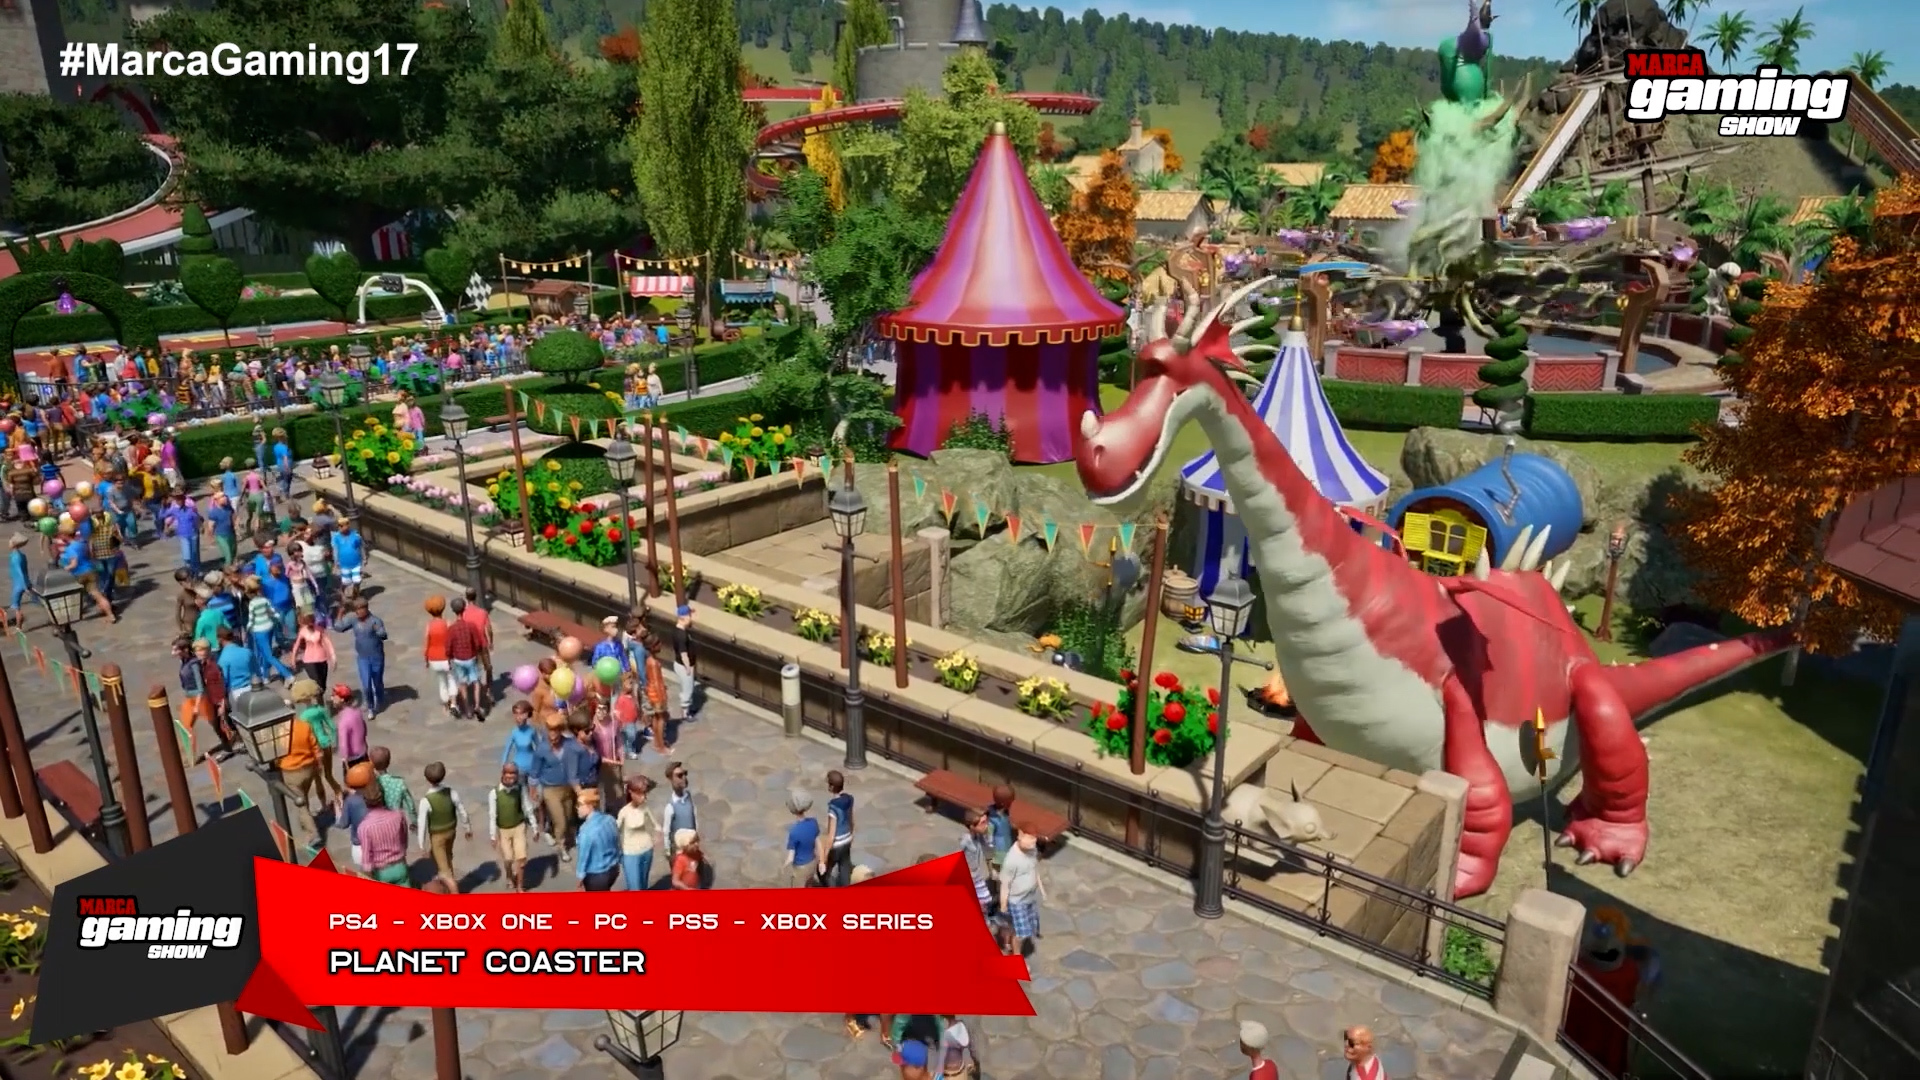 Planet Coaster (PC - PS4 - PS5 - XBOX ONE - XBOX SERIES)